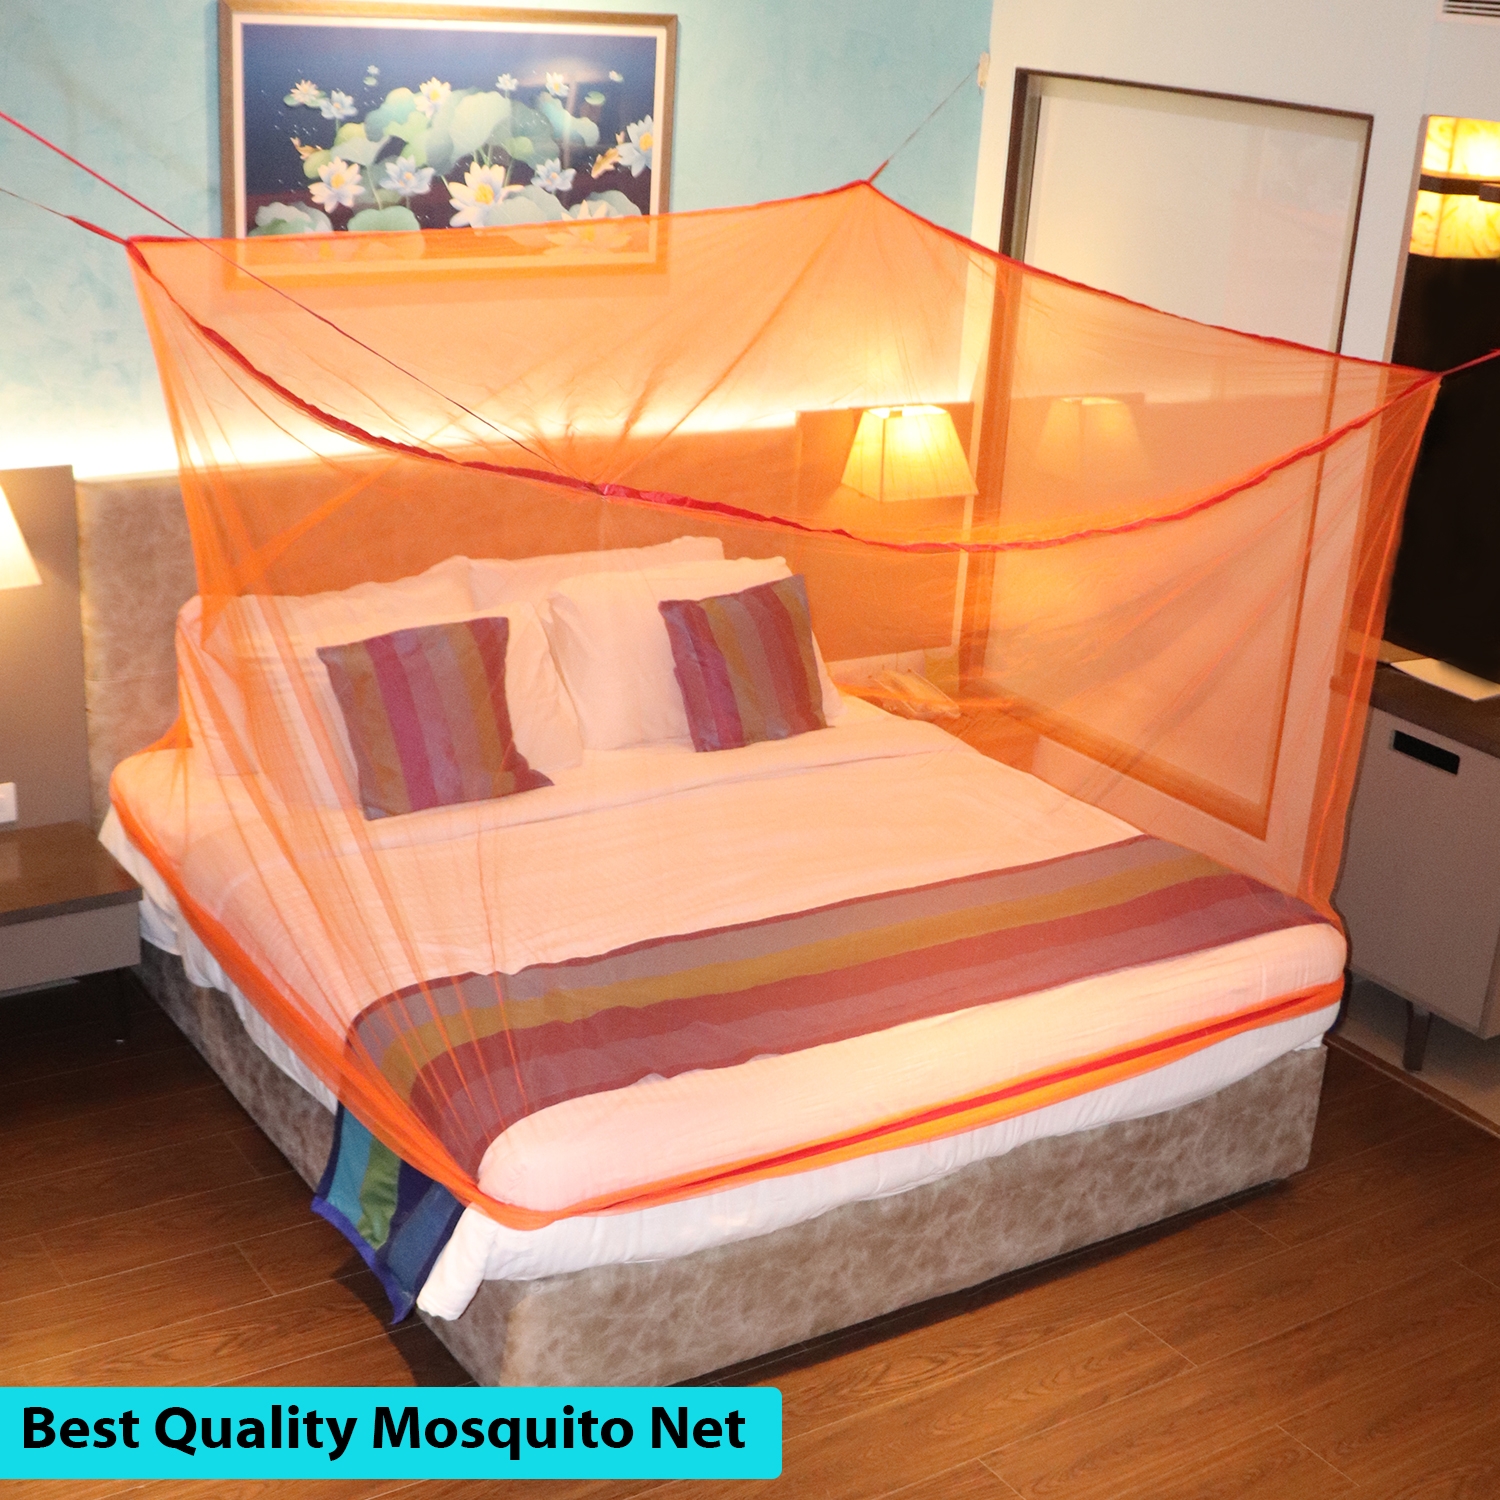 Mosquito Net for Double Bed, King-Size, Square Hanging Foldable Polyester Net Orange